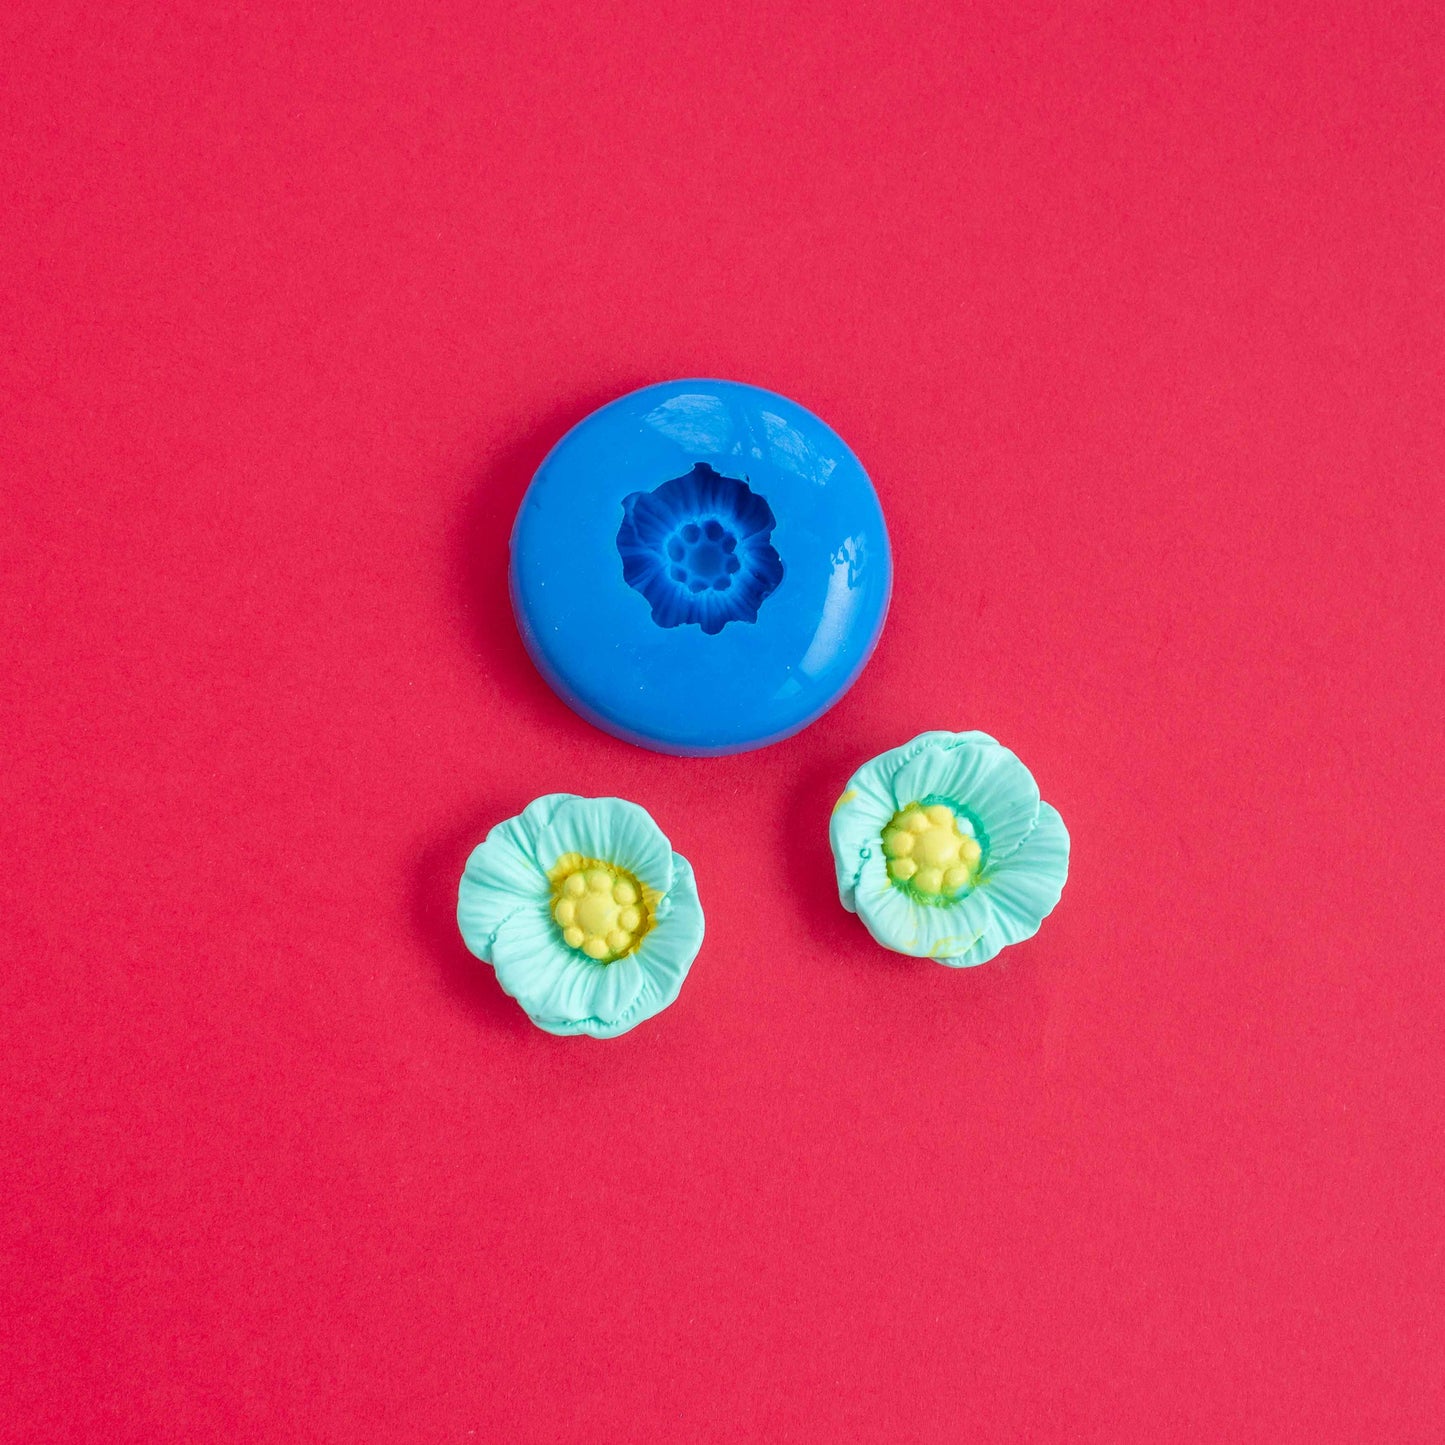 2 clay flowers and siliscone mold on a red background.